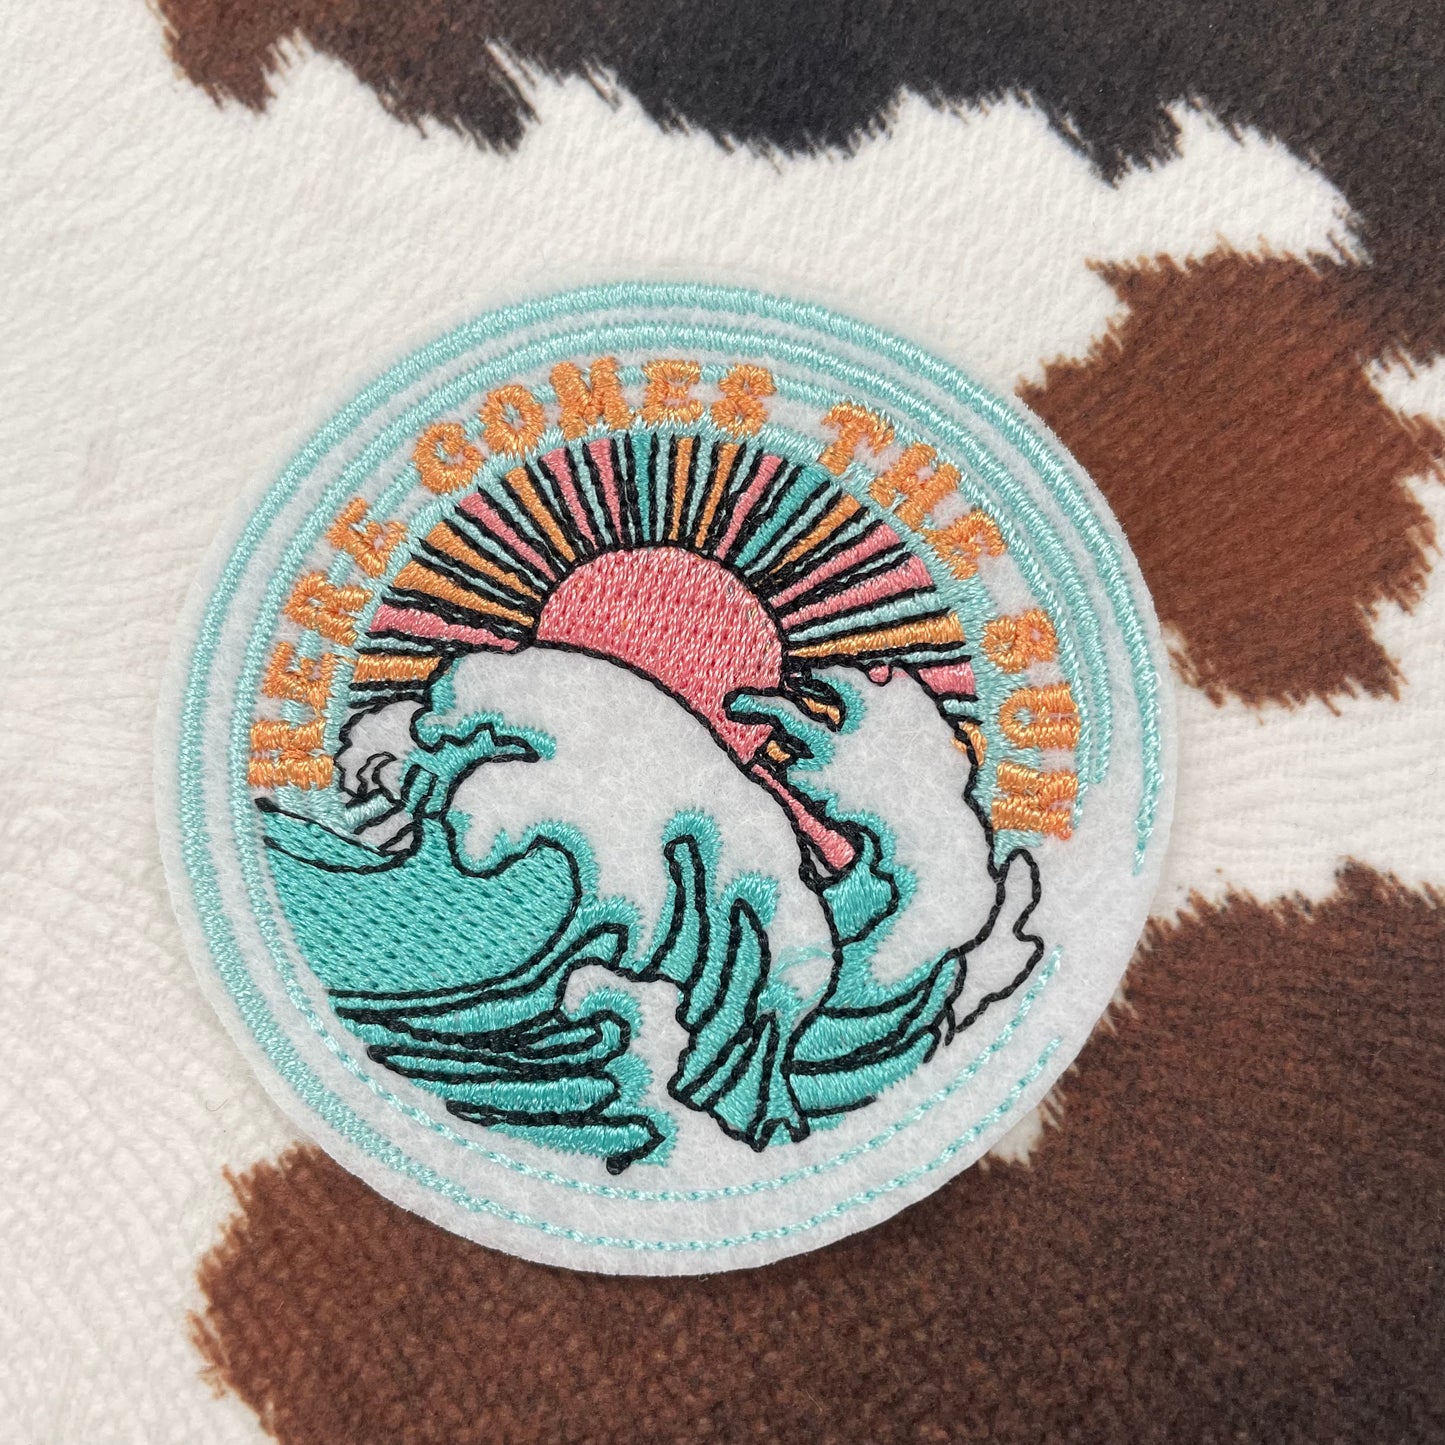 Here Comes the Sun- 2.4" round Embroidery Patch